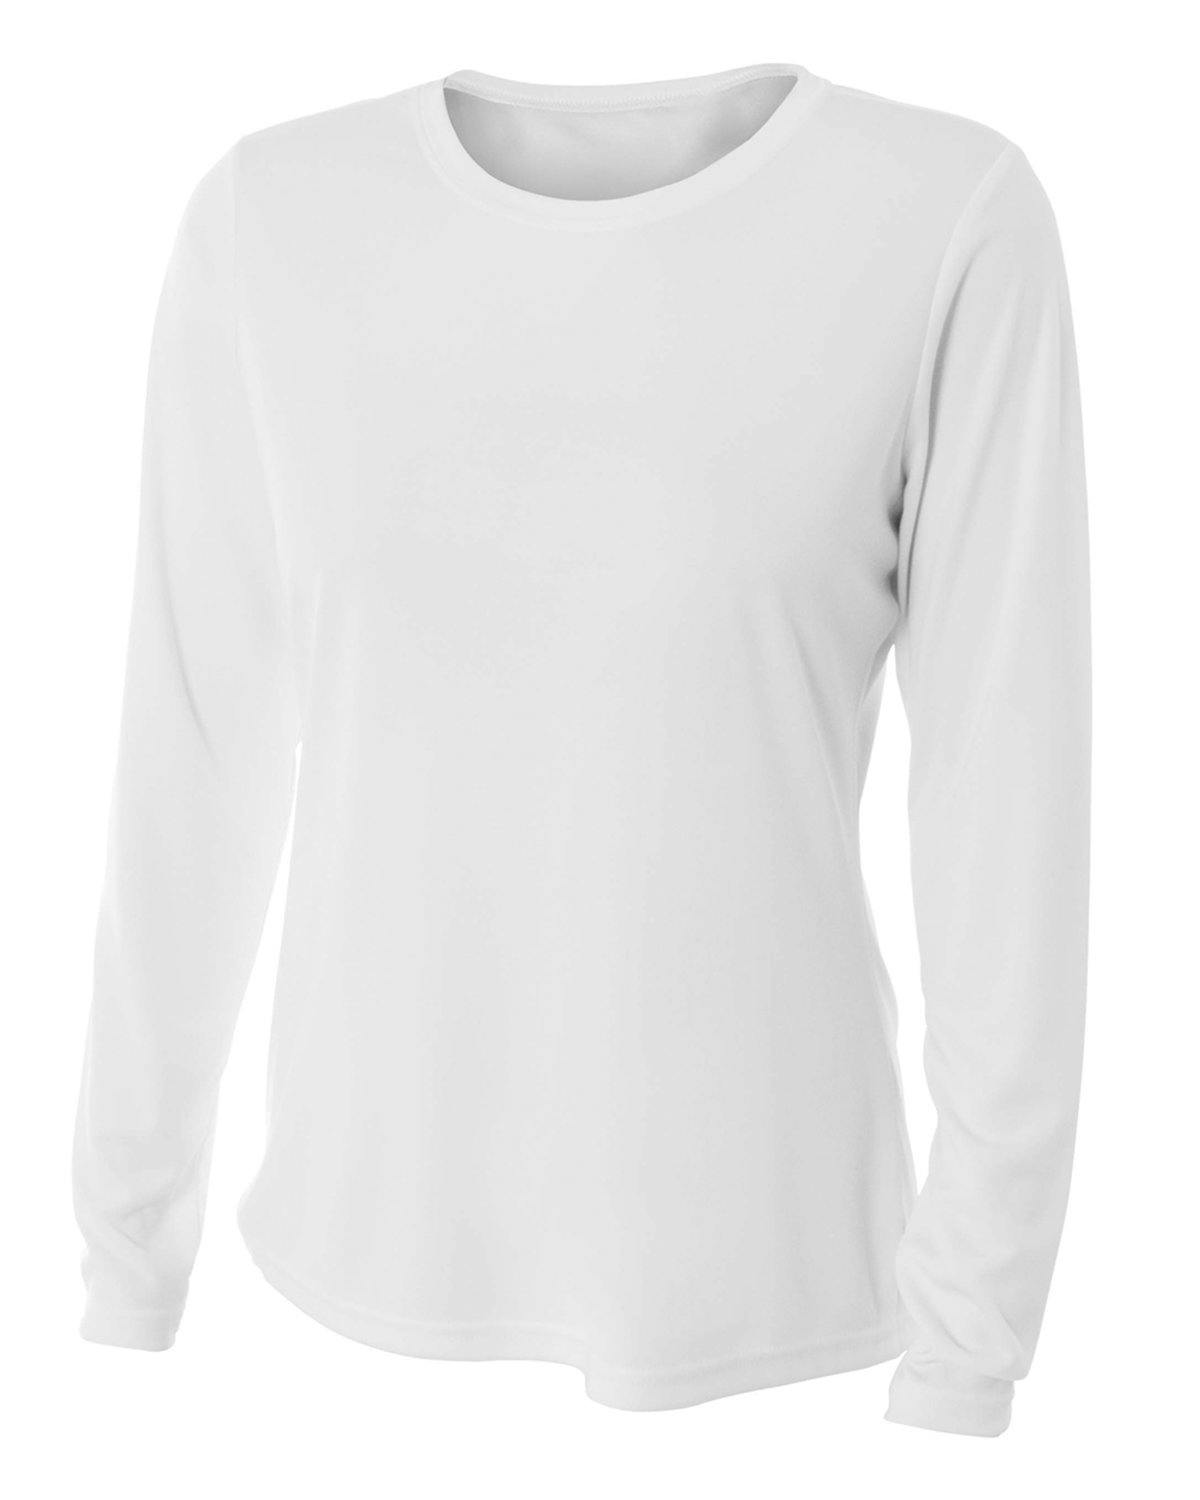 Image for Ladies' Long Sleeve Cooling Performance Crew Shirt